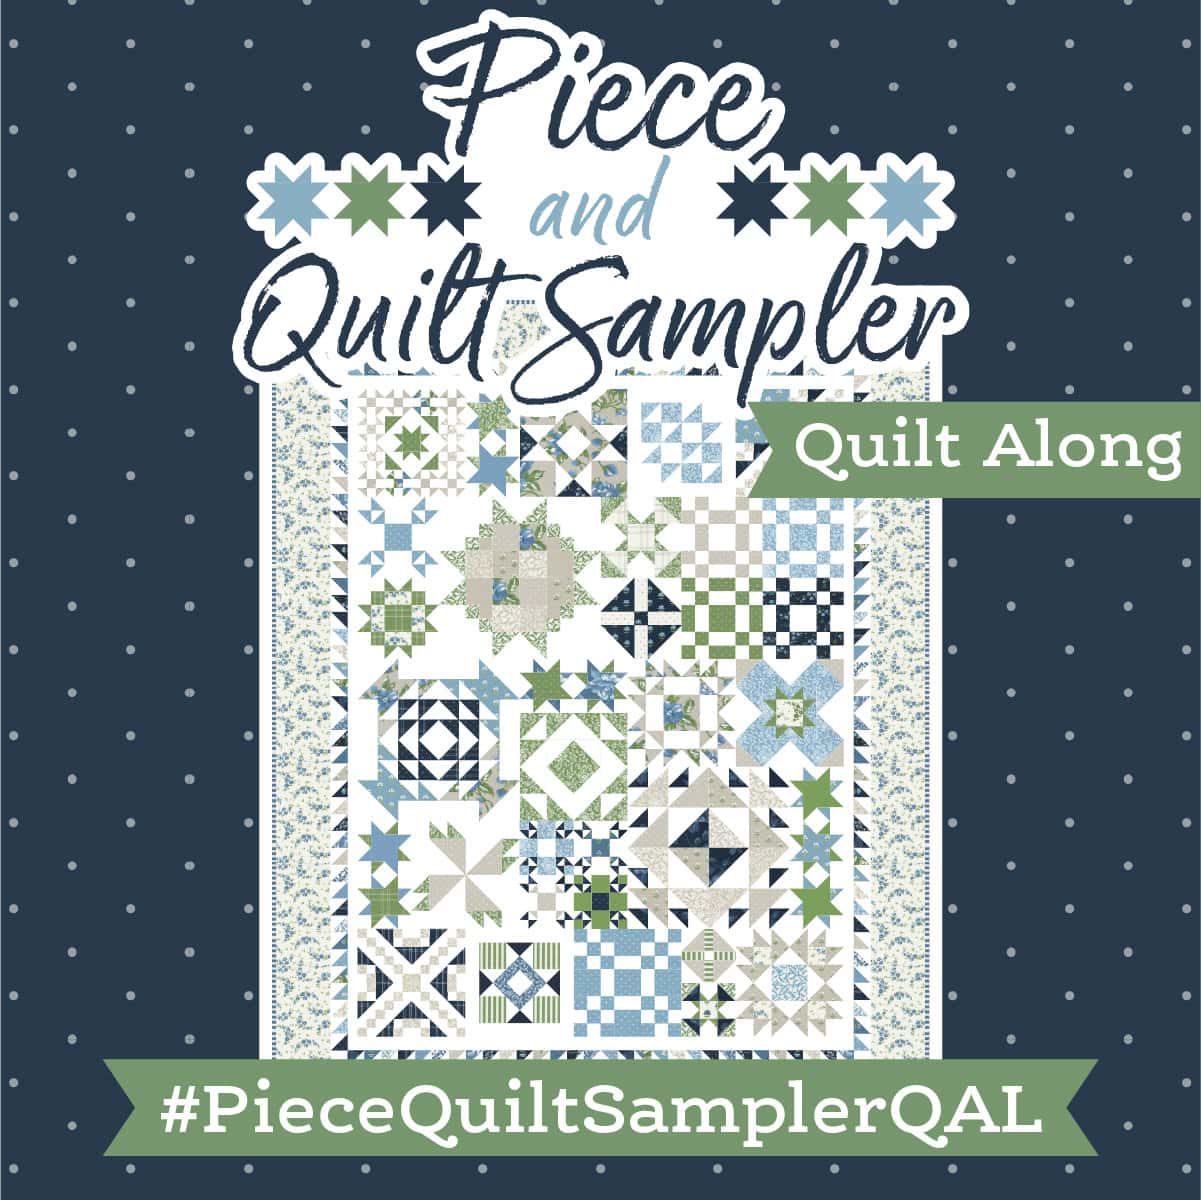 Piece and Quilt Sampler QAL begins March 2024 through February 2025.  Hosted by Fat Quarter Shop and I'm participating!